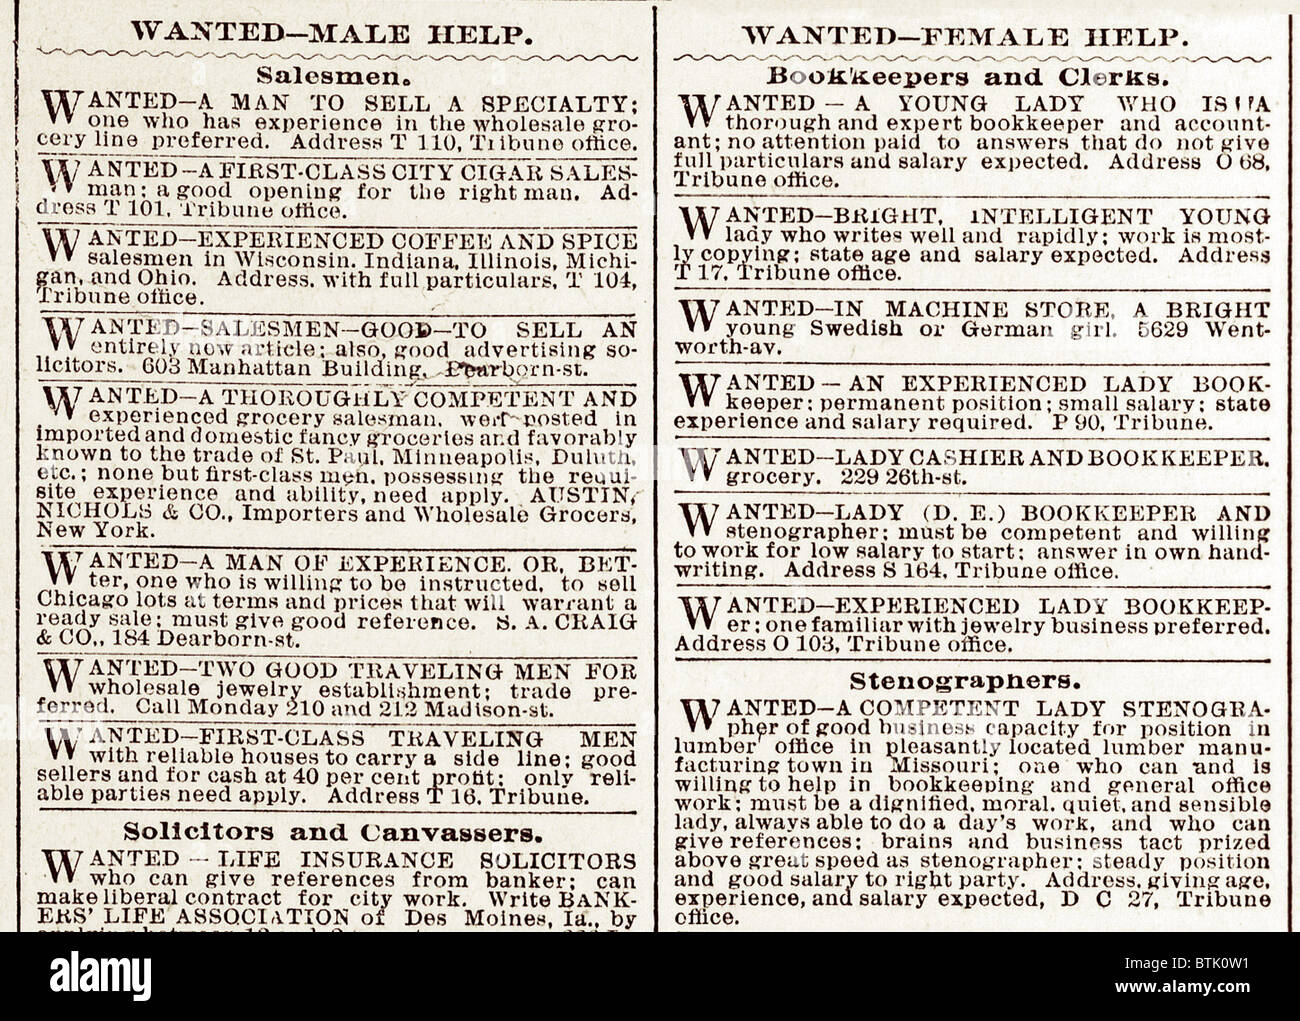 Help Wanted. Wanted--Male help; Wanted--Female help- Help wanted advertisments from the Chicago Tribune arranged in separate sections by gender. Jan 10, 1892 Stock Photo